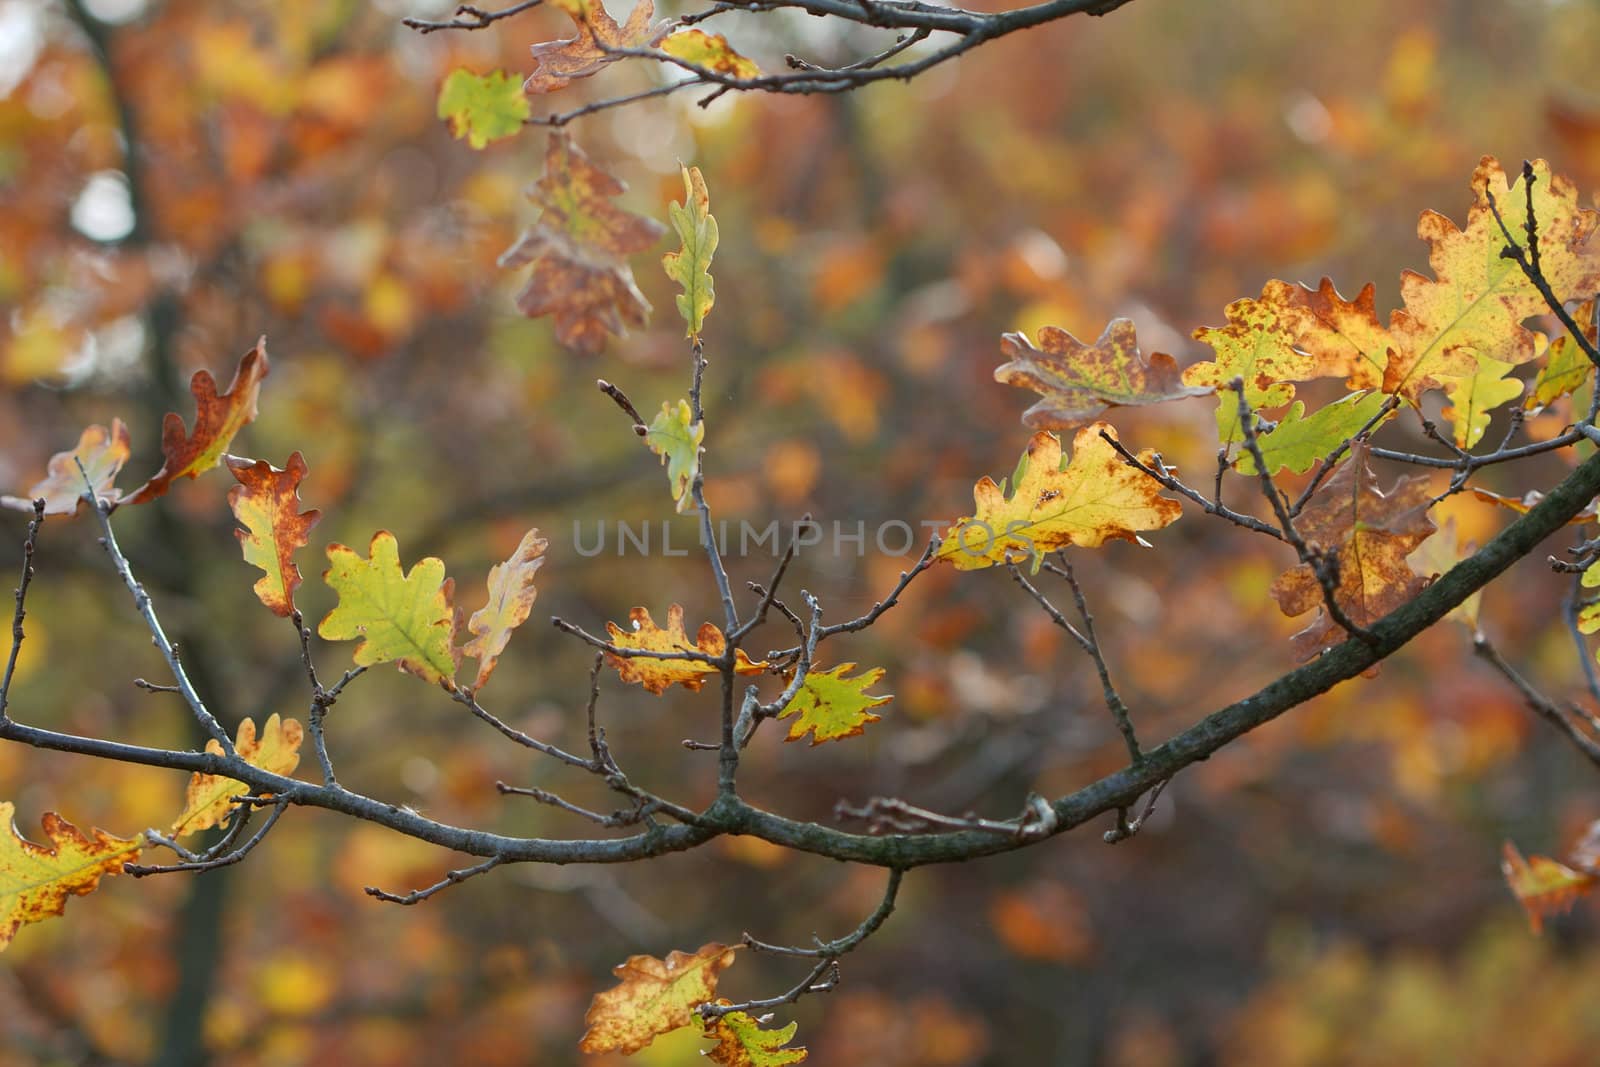 Autumn tree detail with falling leaves